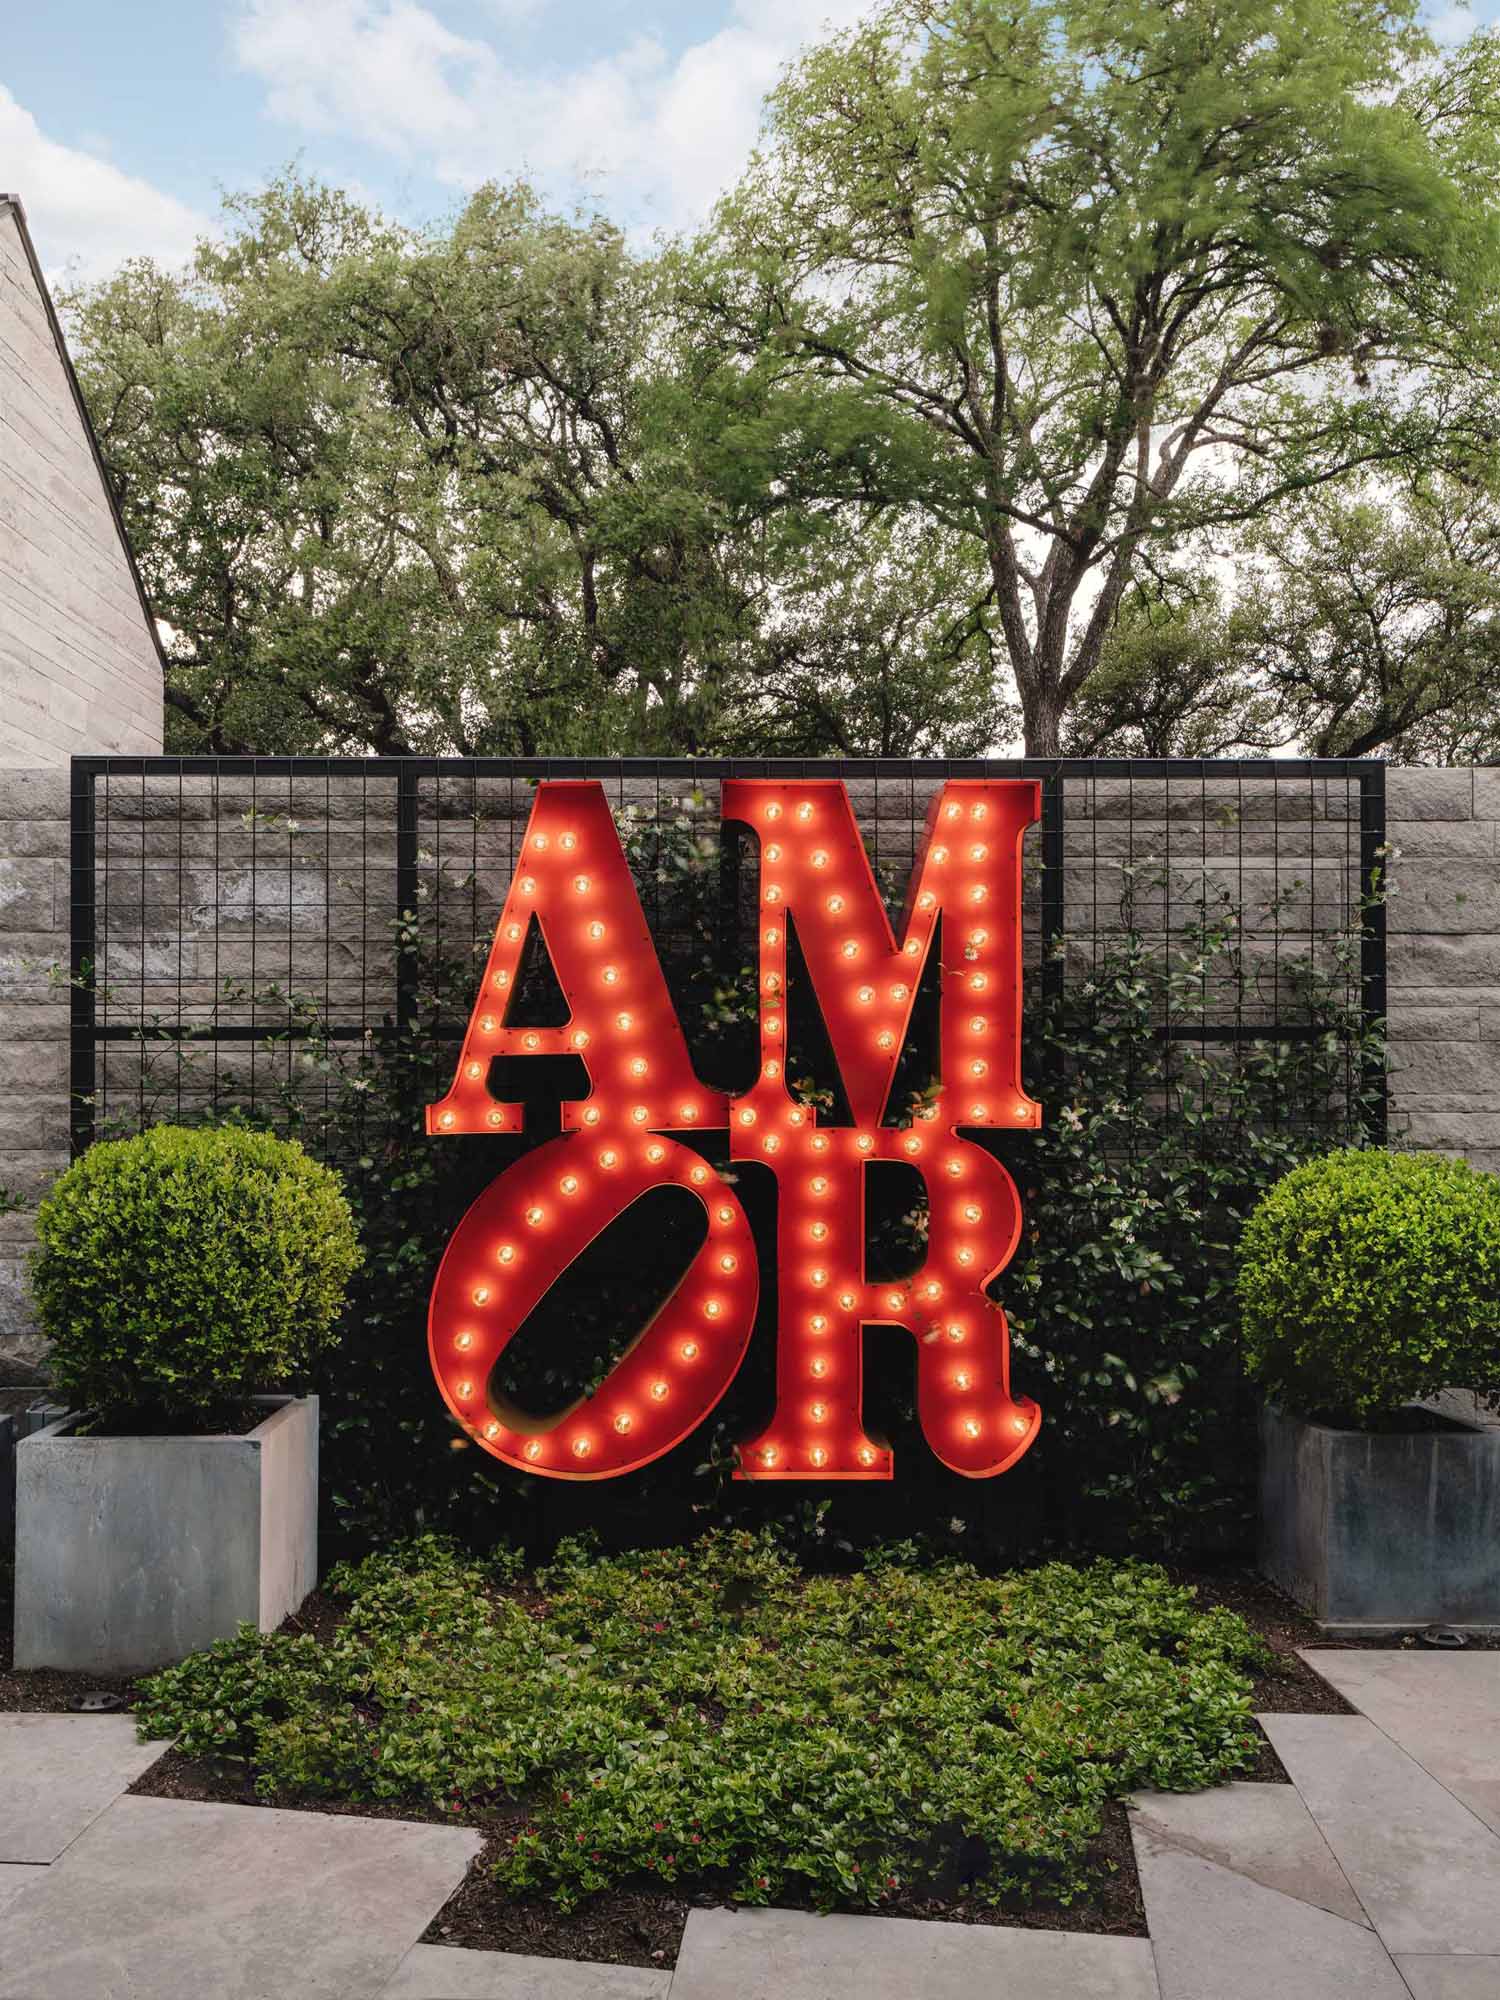 A discreet courtyard leads into the main house and features a bistro dining area and a custom ‘amor’ metal sign (inspired by the original iconic sculpture by Robert Indiana).